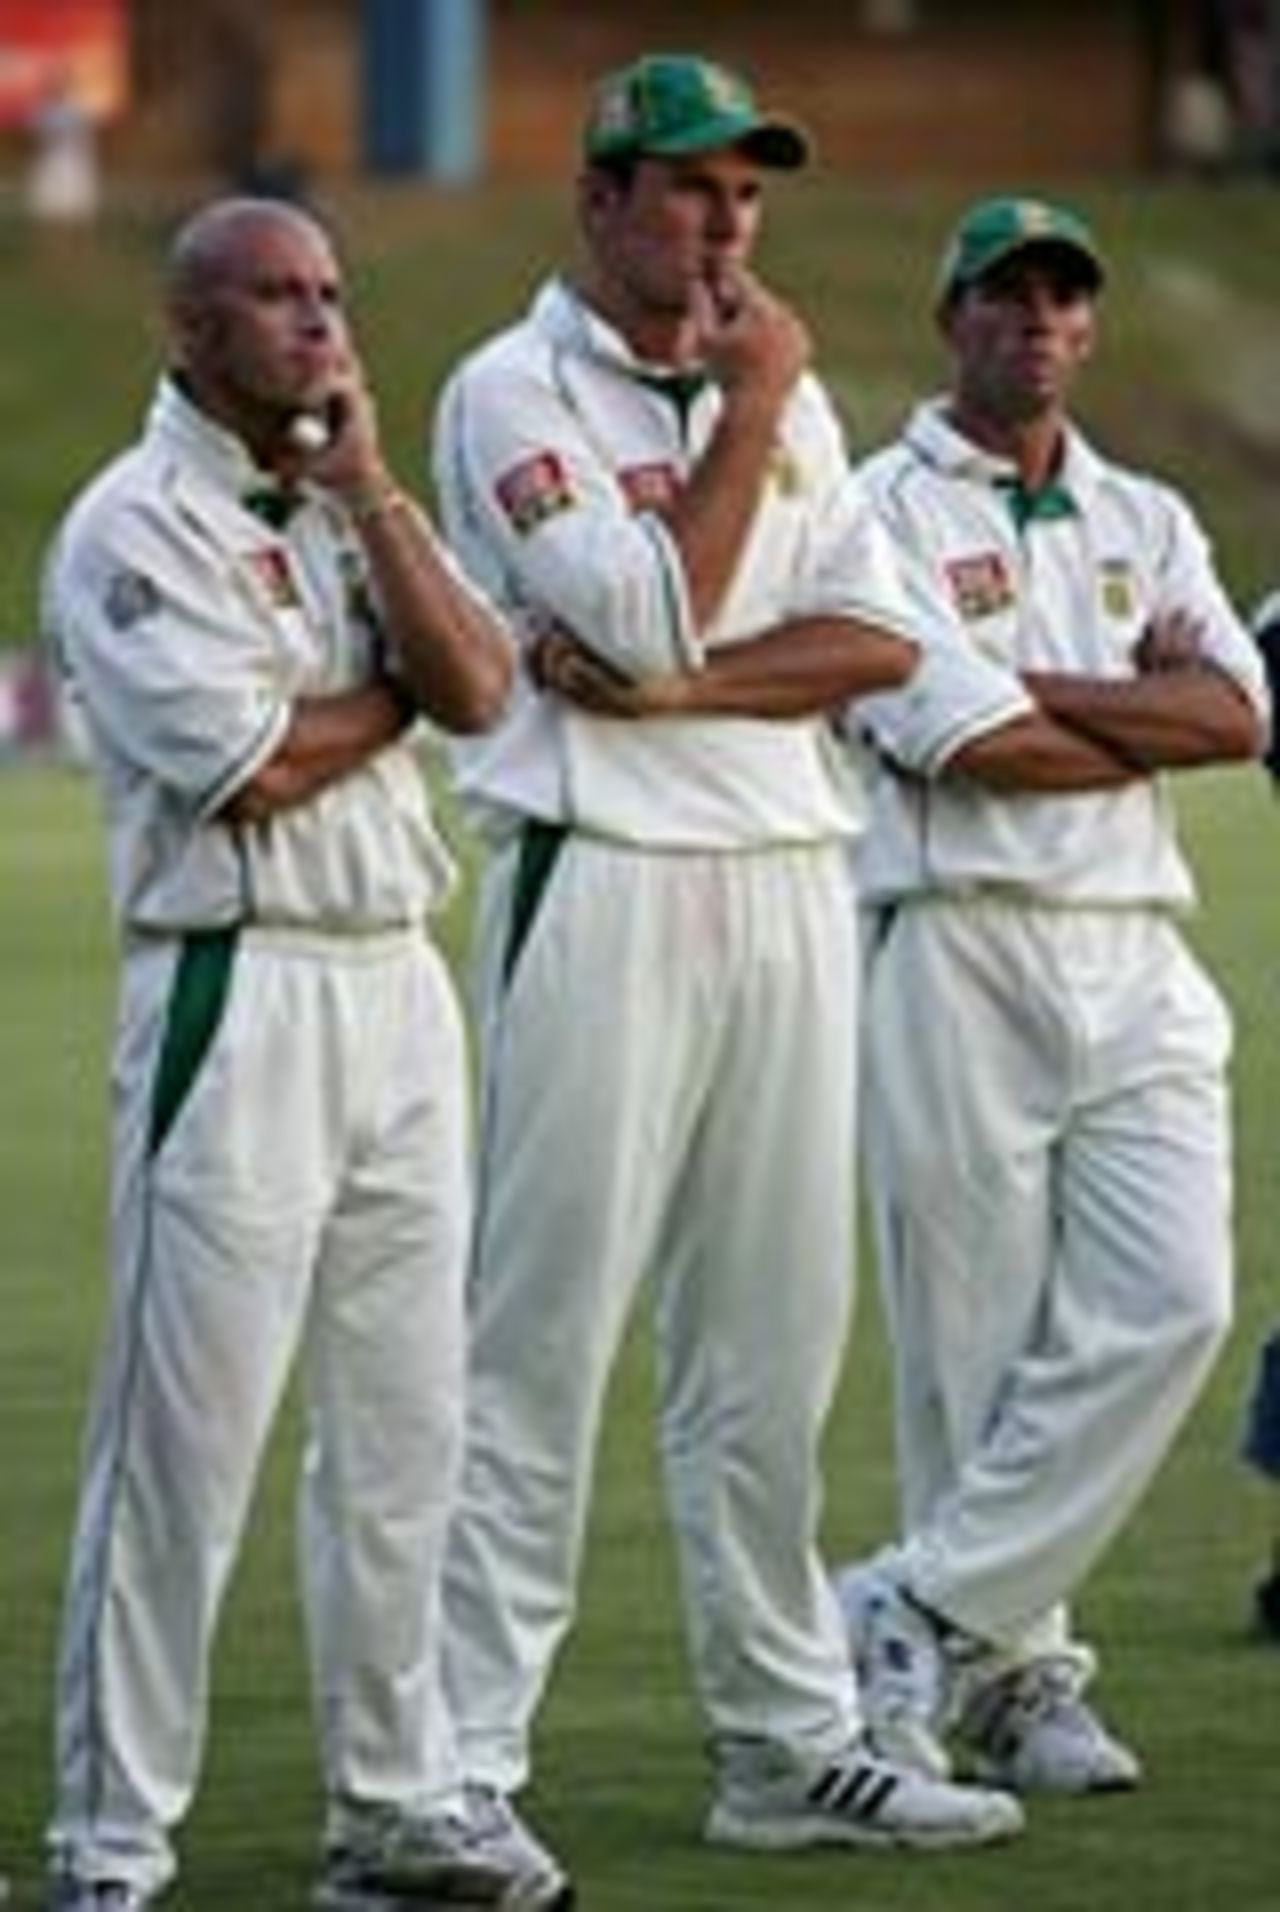 Graeme Smith reflects on series defeat, South Africa v England, 5th Test, Centurion January 26, 2005